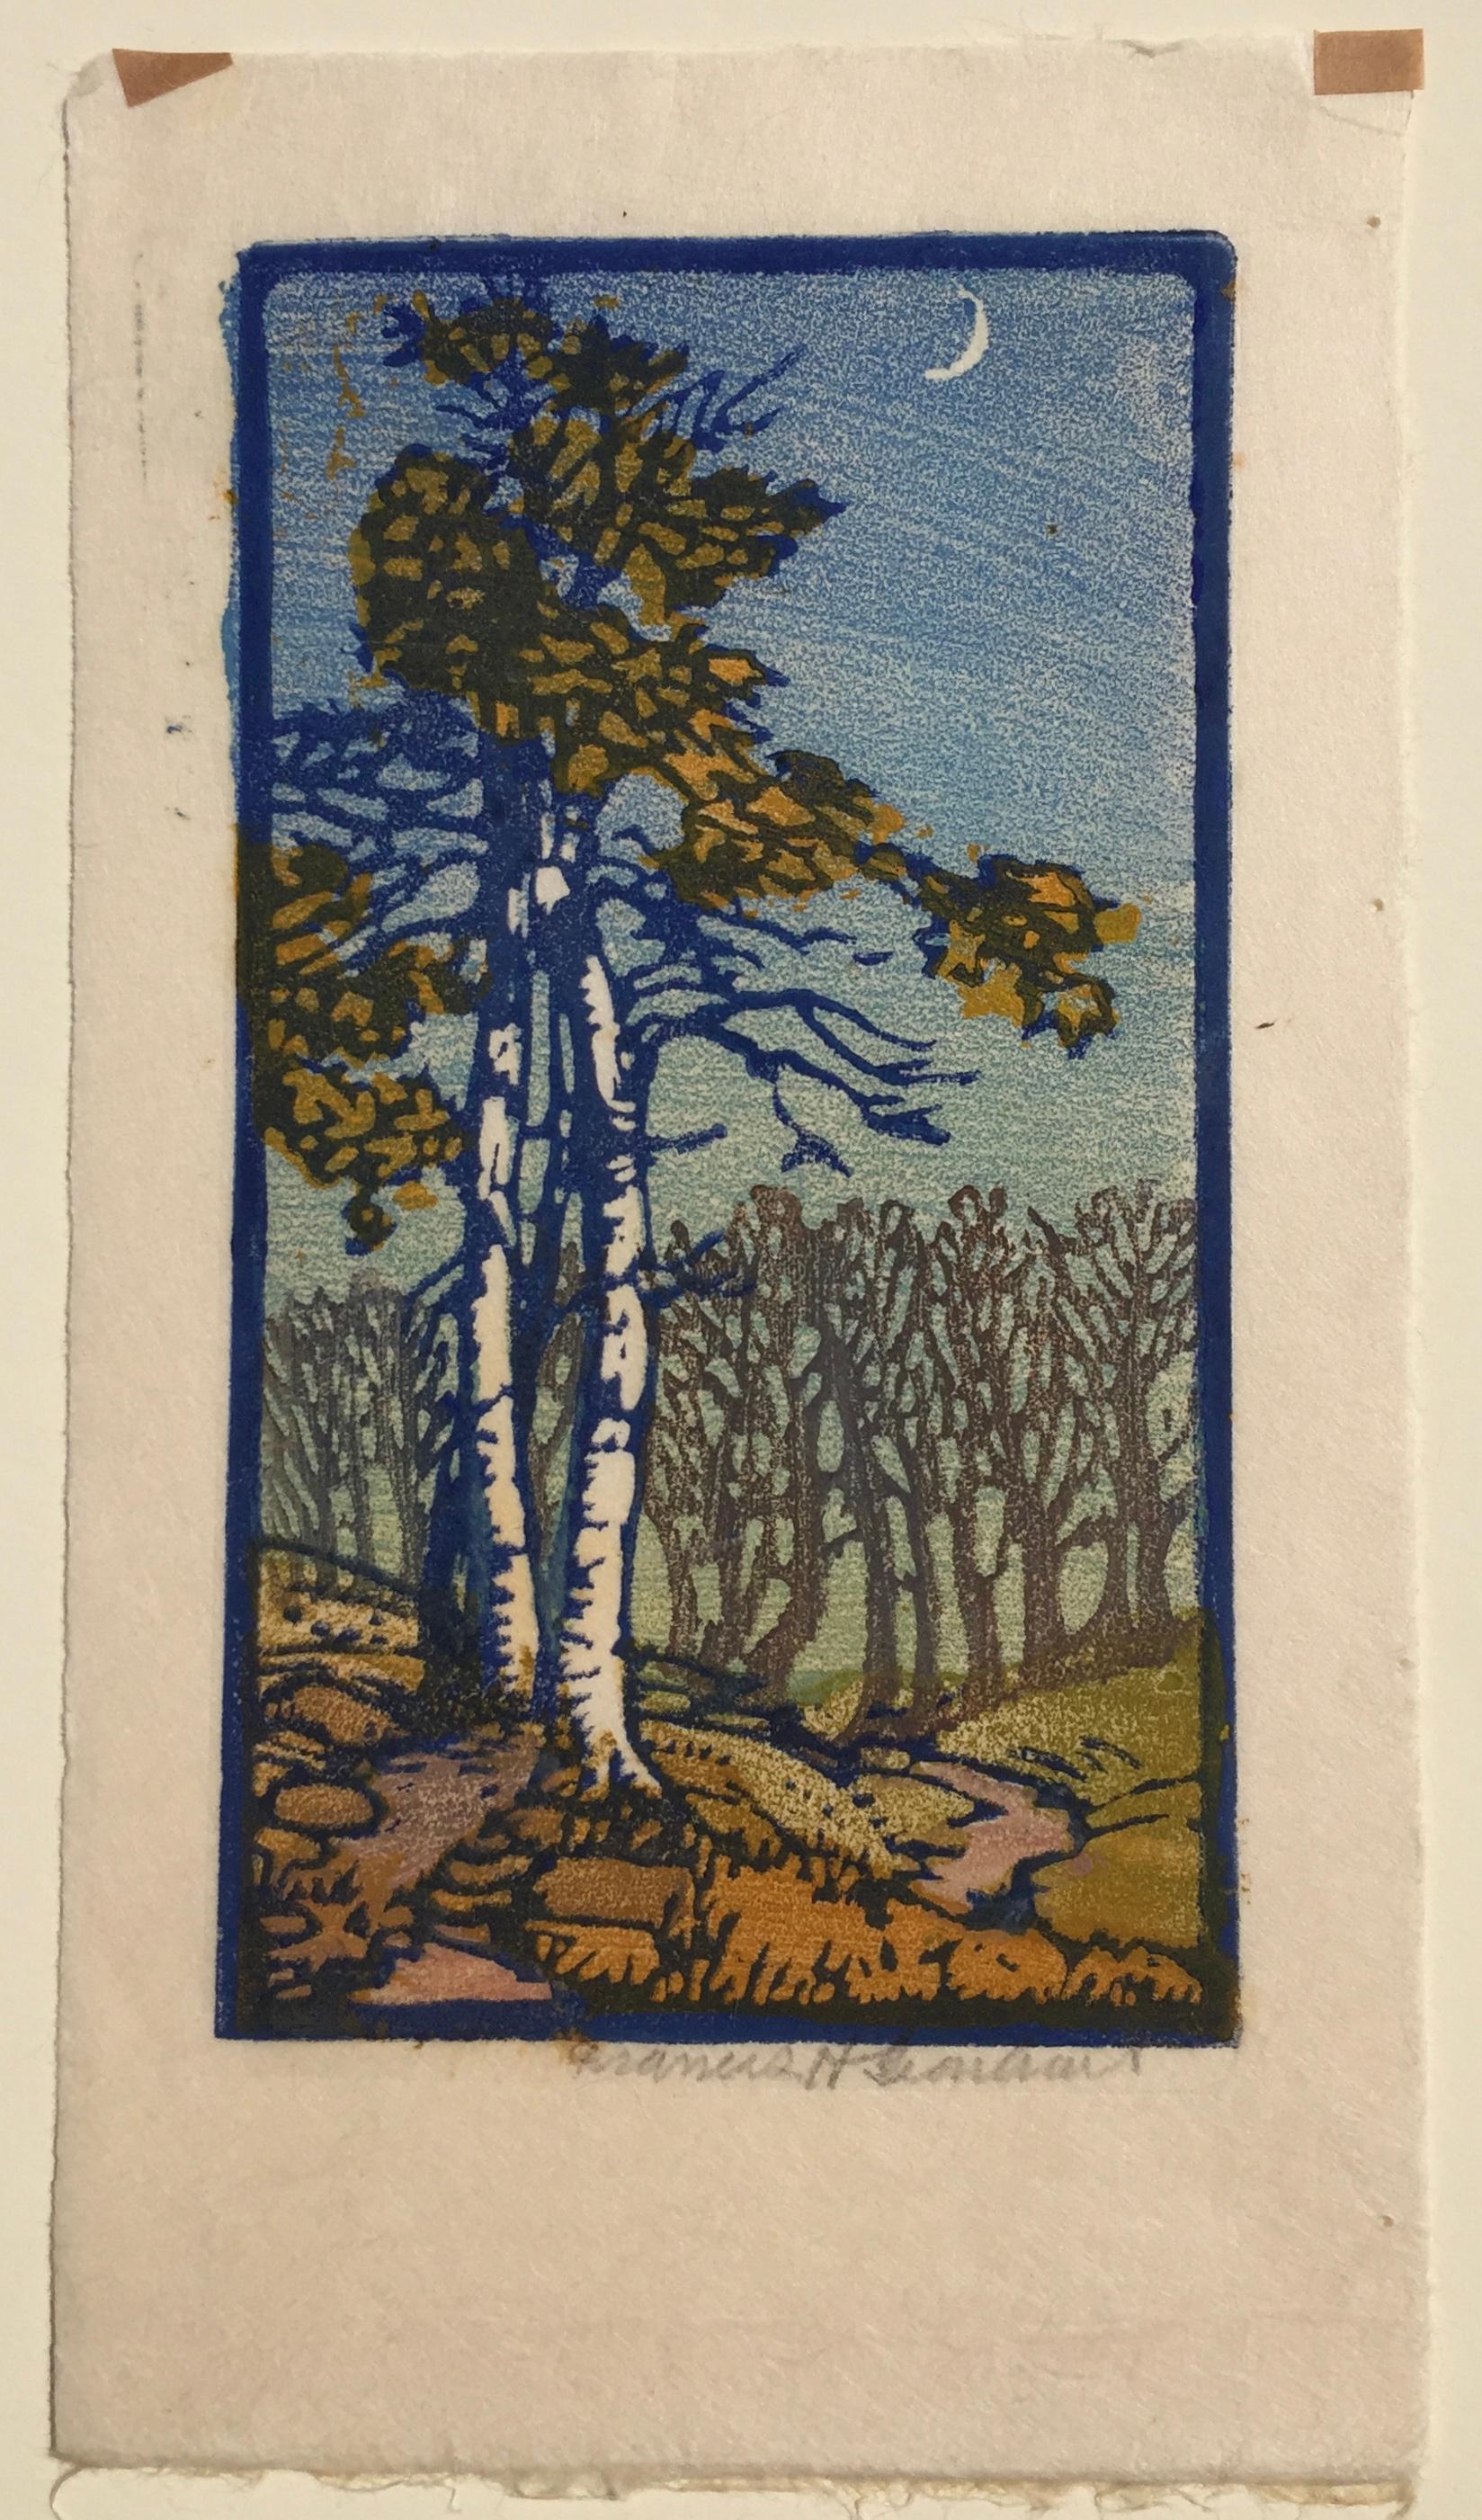 Crescent Moon, aka Autumn Sycamores, aka And Now the Moon - Print by Frances H. Gearhart